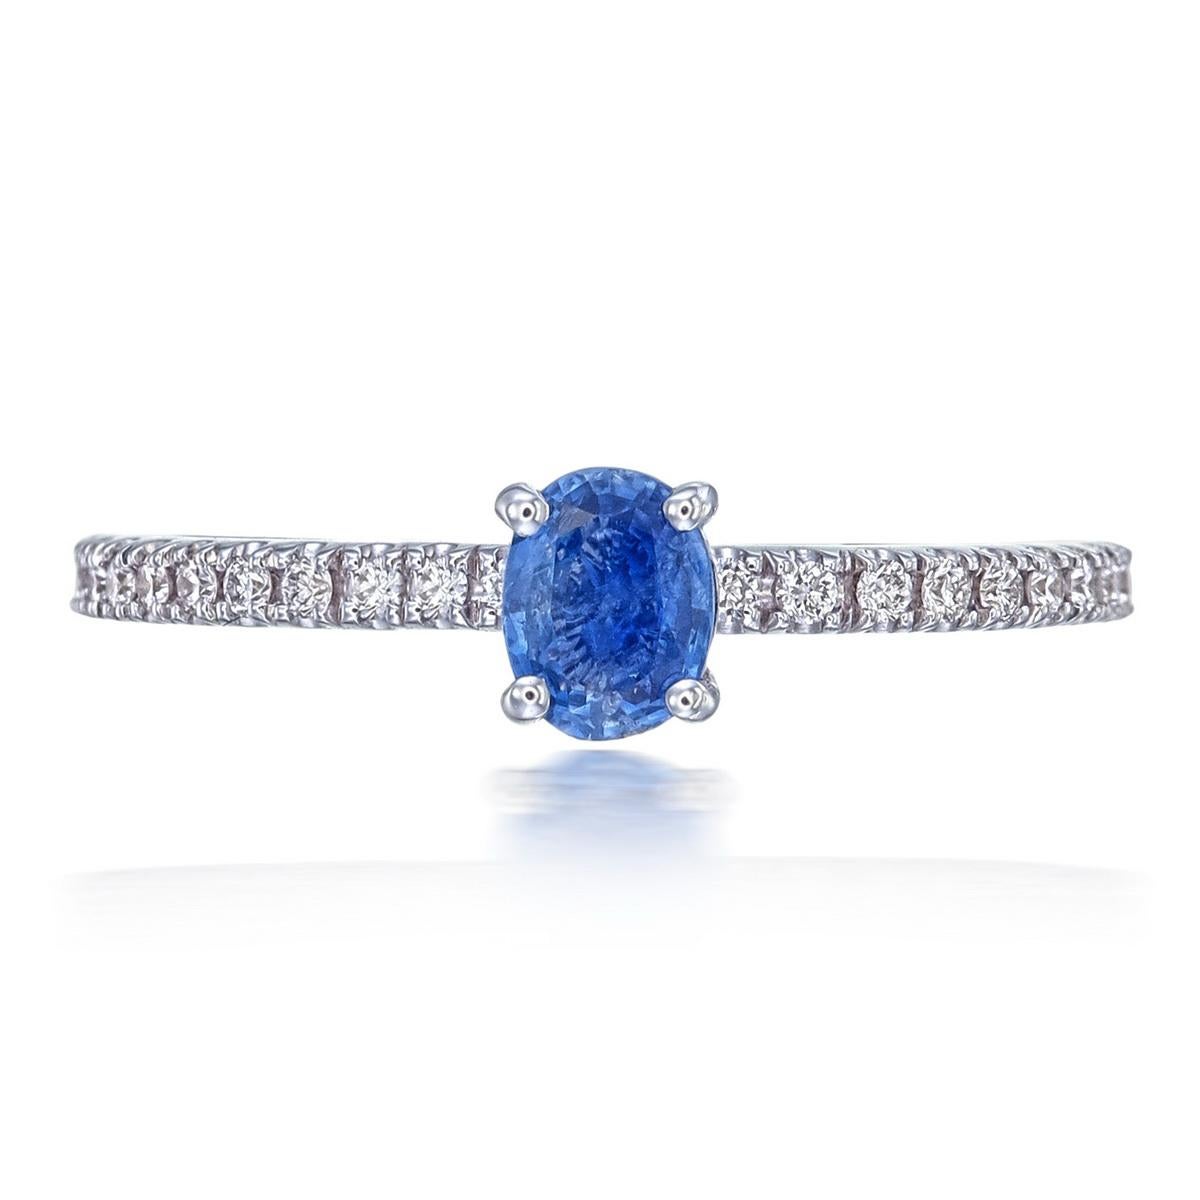 A brand new blue sapphire and diamond ring by Rewa Jewellery. One of our best seller designs is now available with a Kashmir Sapphire! This ring is perfect for daily wear and easy to style on any outfit.

The center gemstone has a sky blue colour